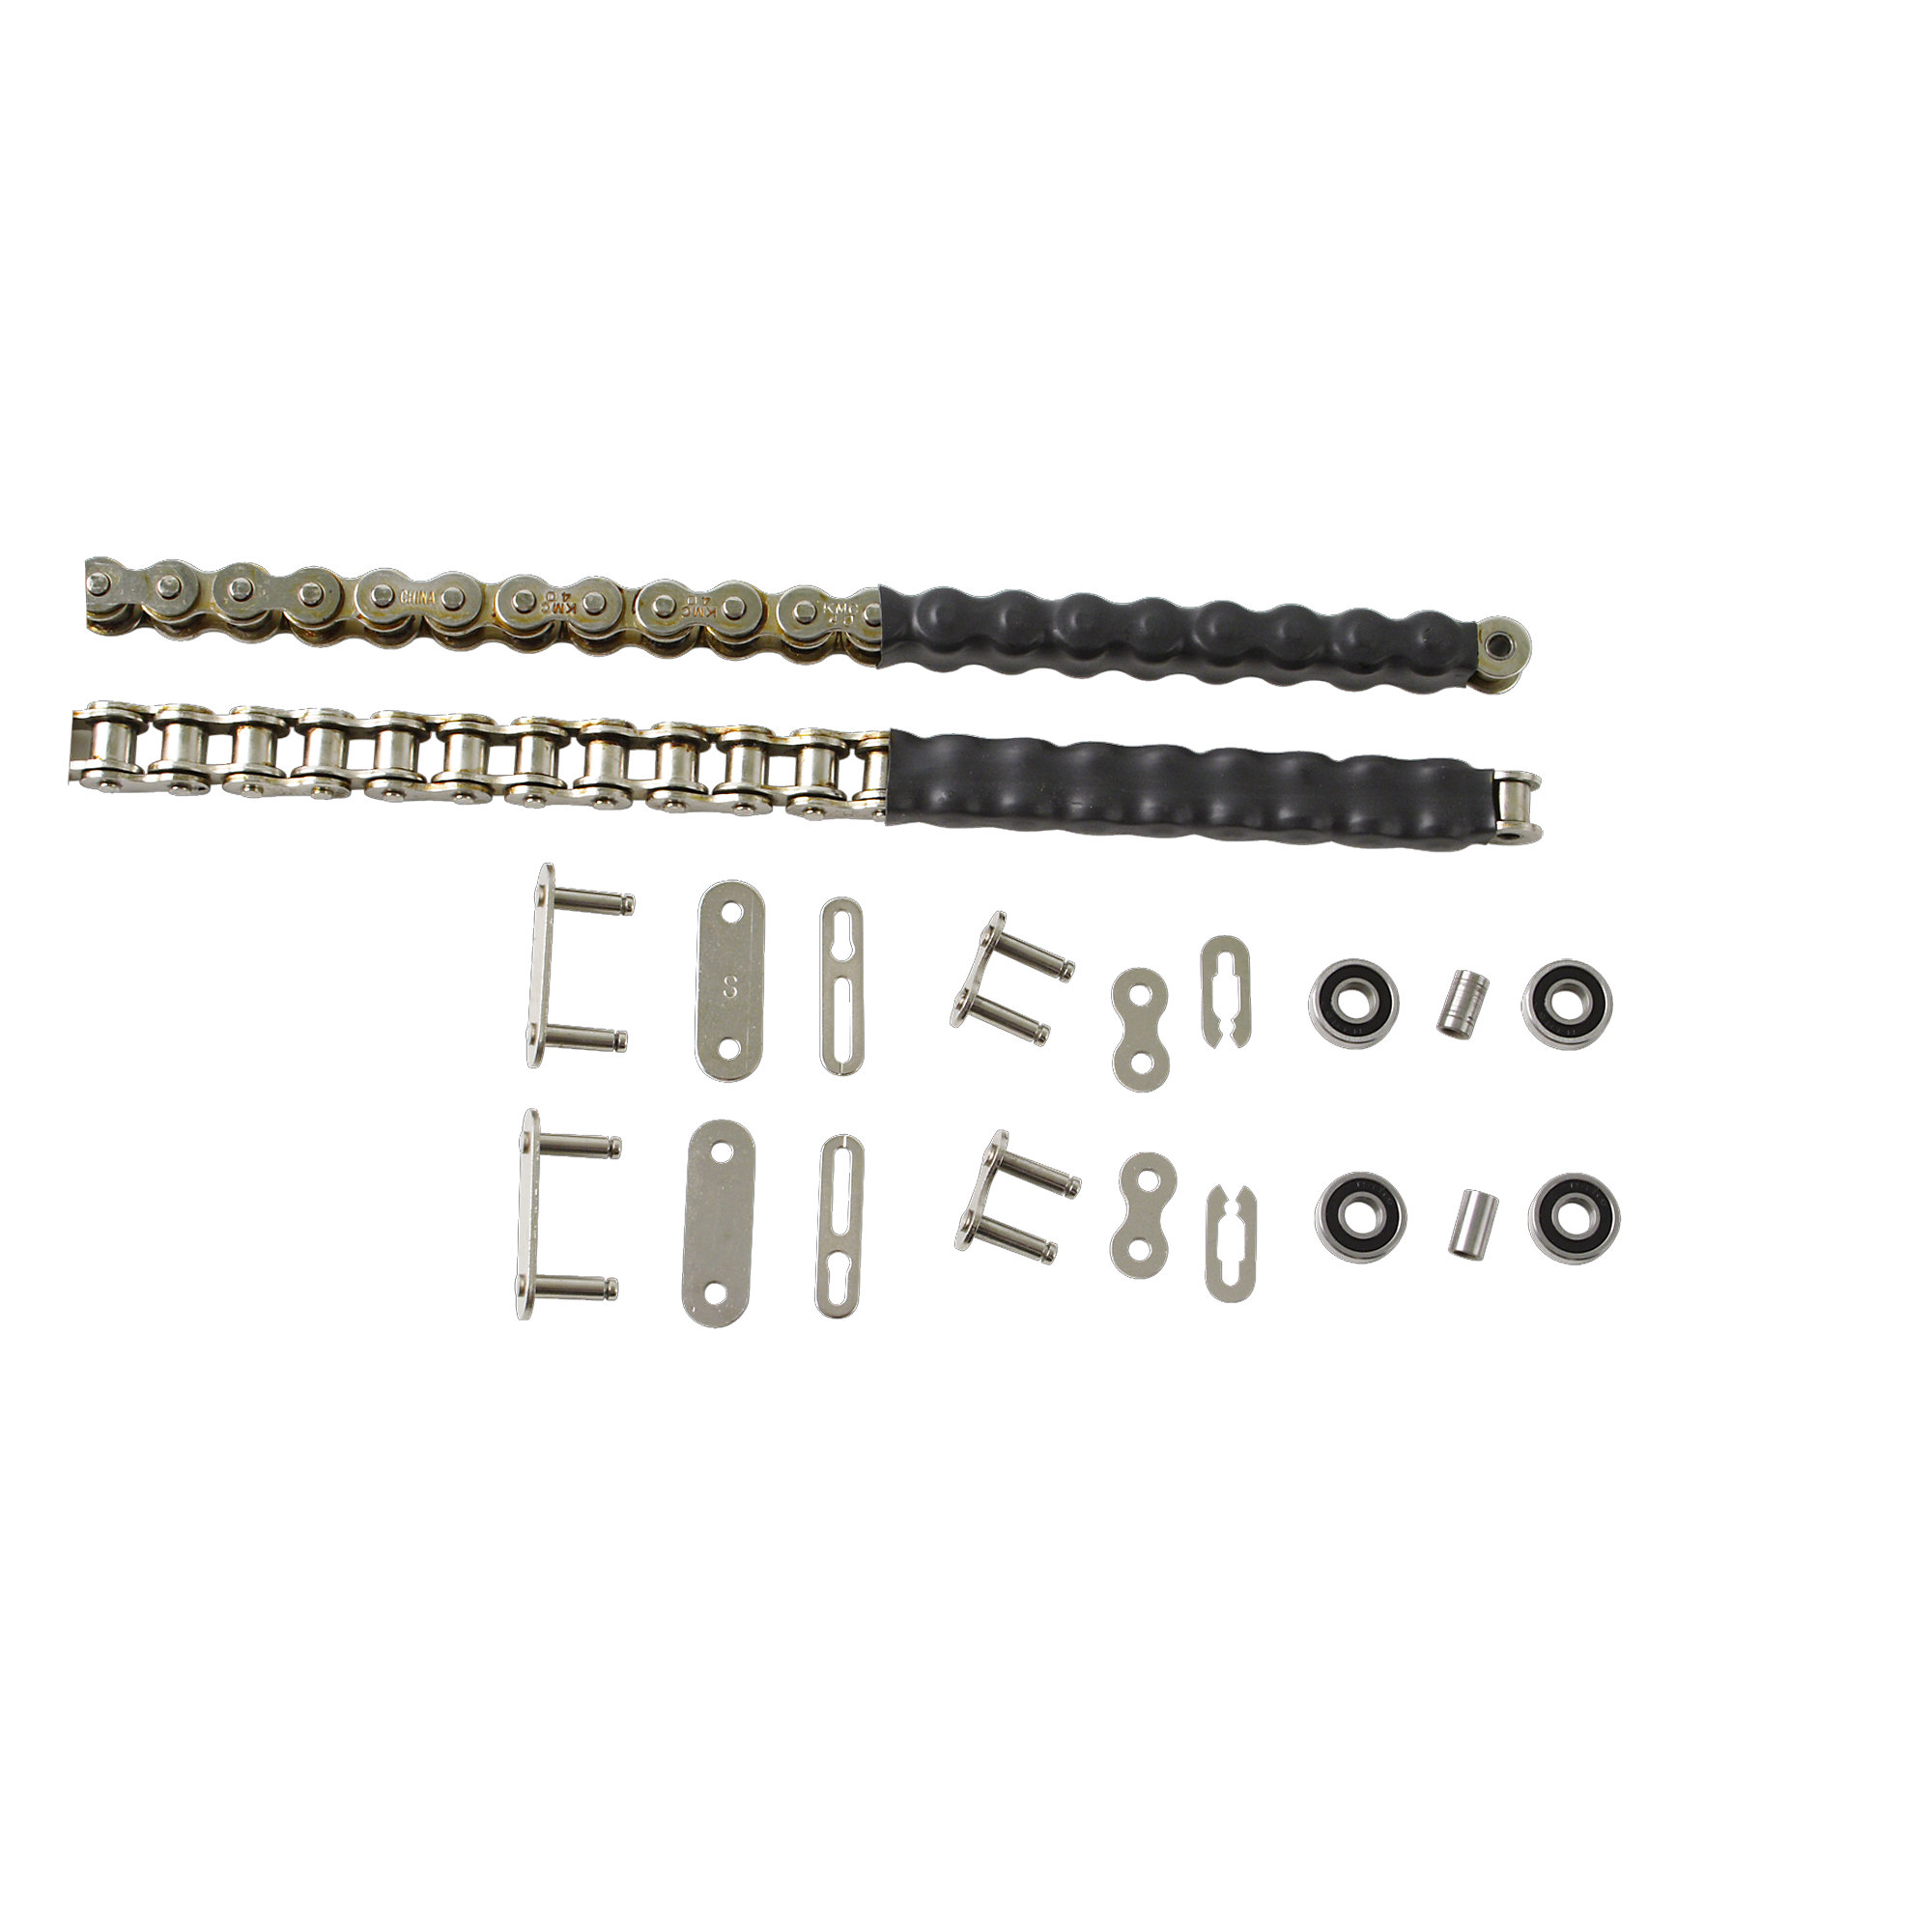 Step Chain Parts Kit with Armour Guard | Stairmaster